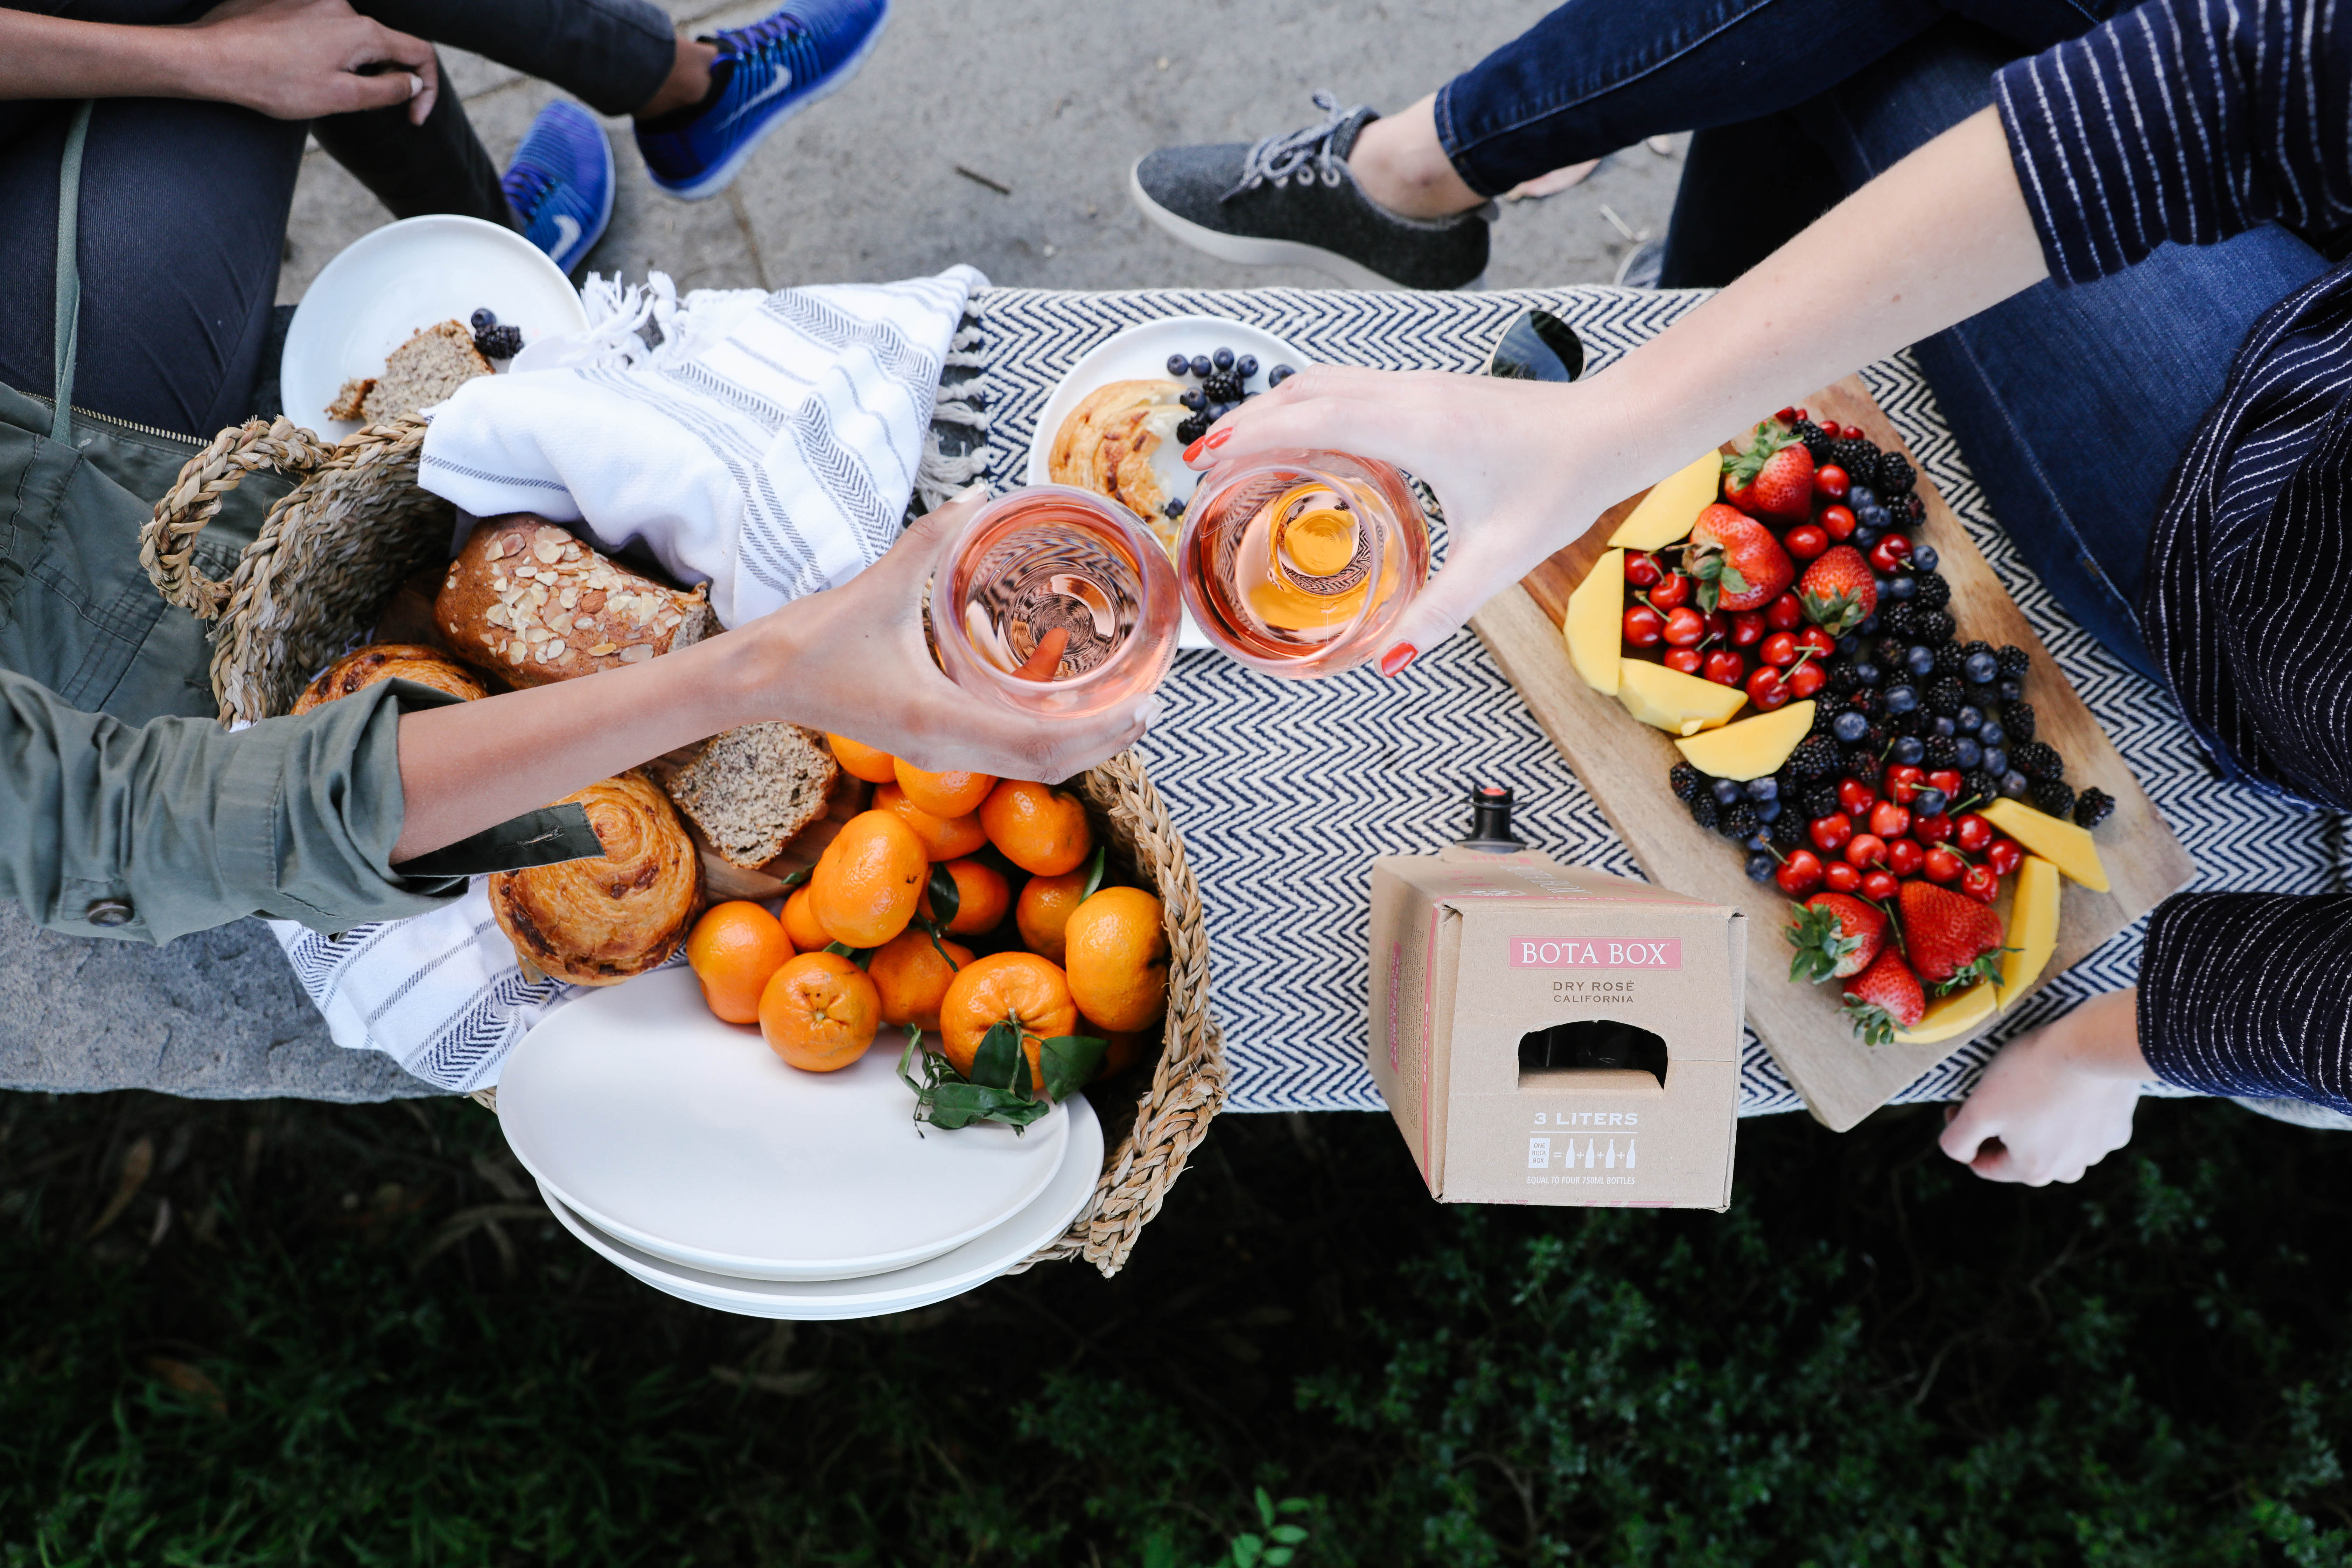 An Outdoor Brunch Picnic with Bota Box.